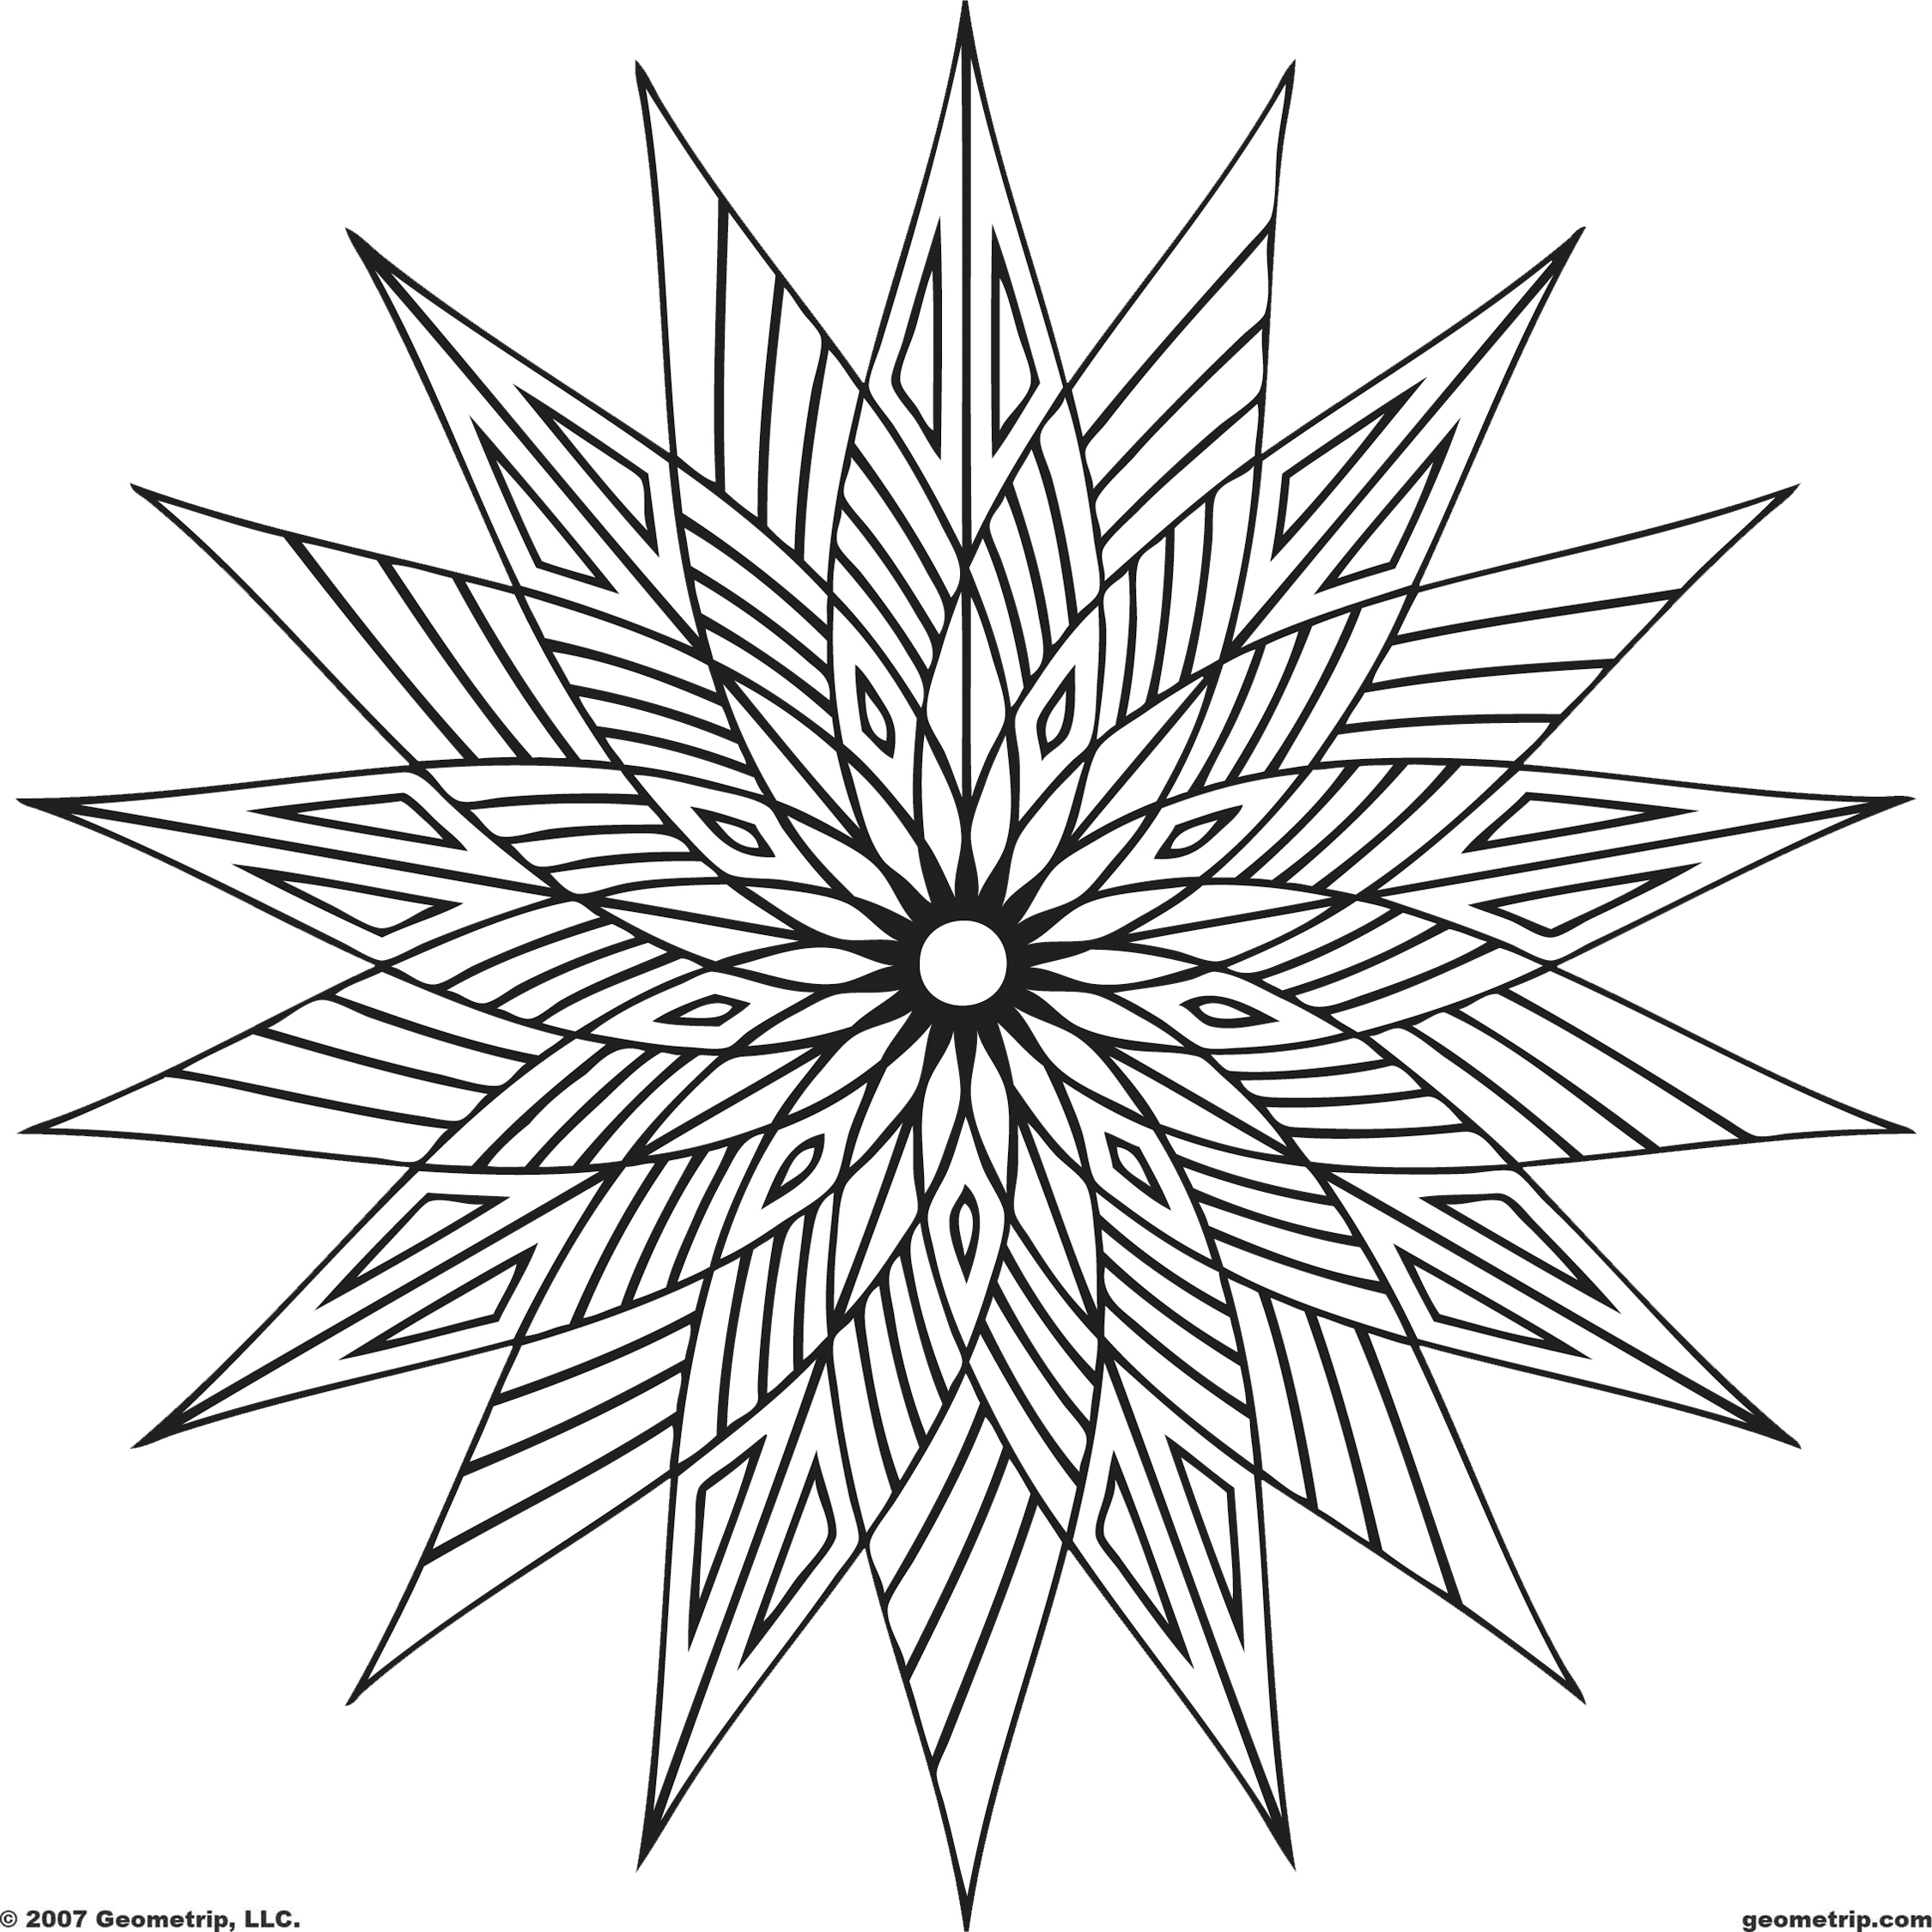  Hot Star Cool Coloring Pages | Coloring pages for kids | coloring pages for boys |